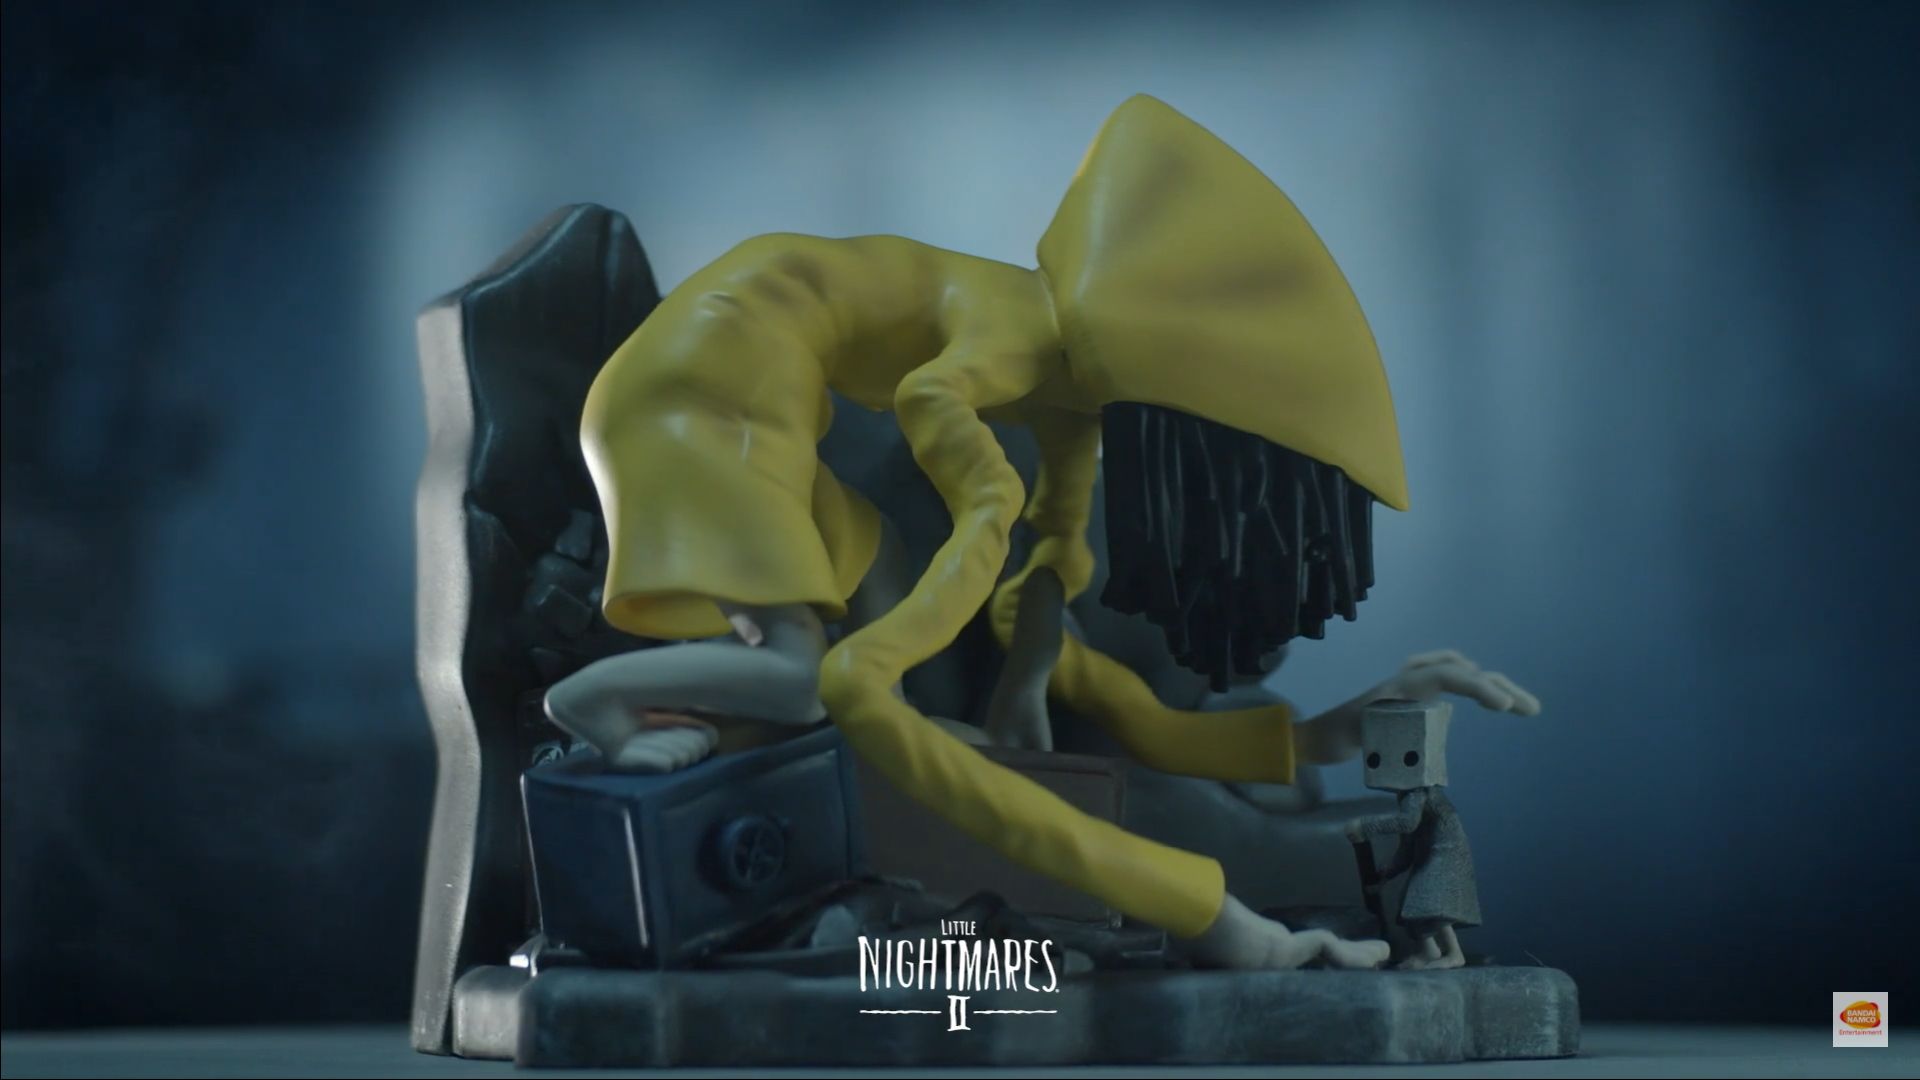 Pre Orders For Little Nightmares II Are Available Now!